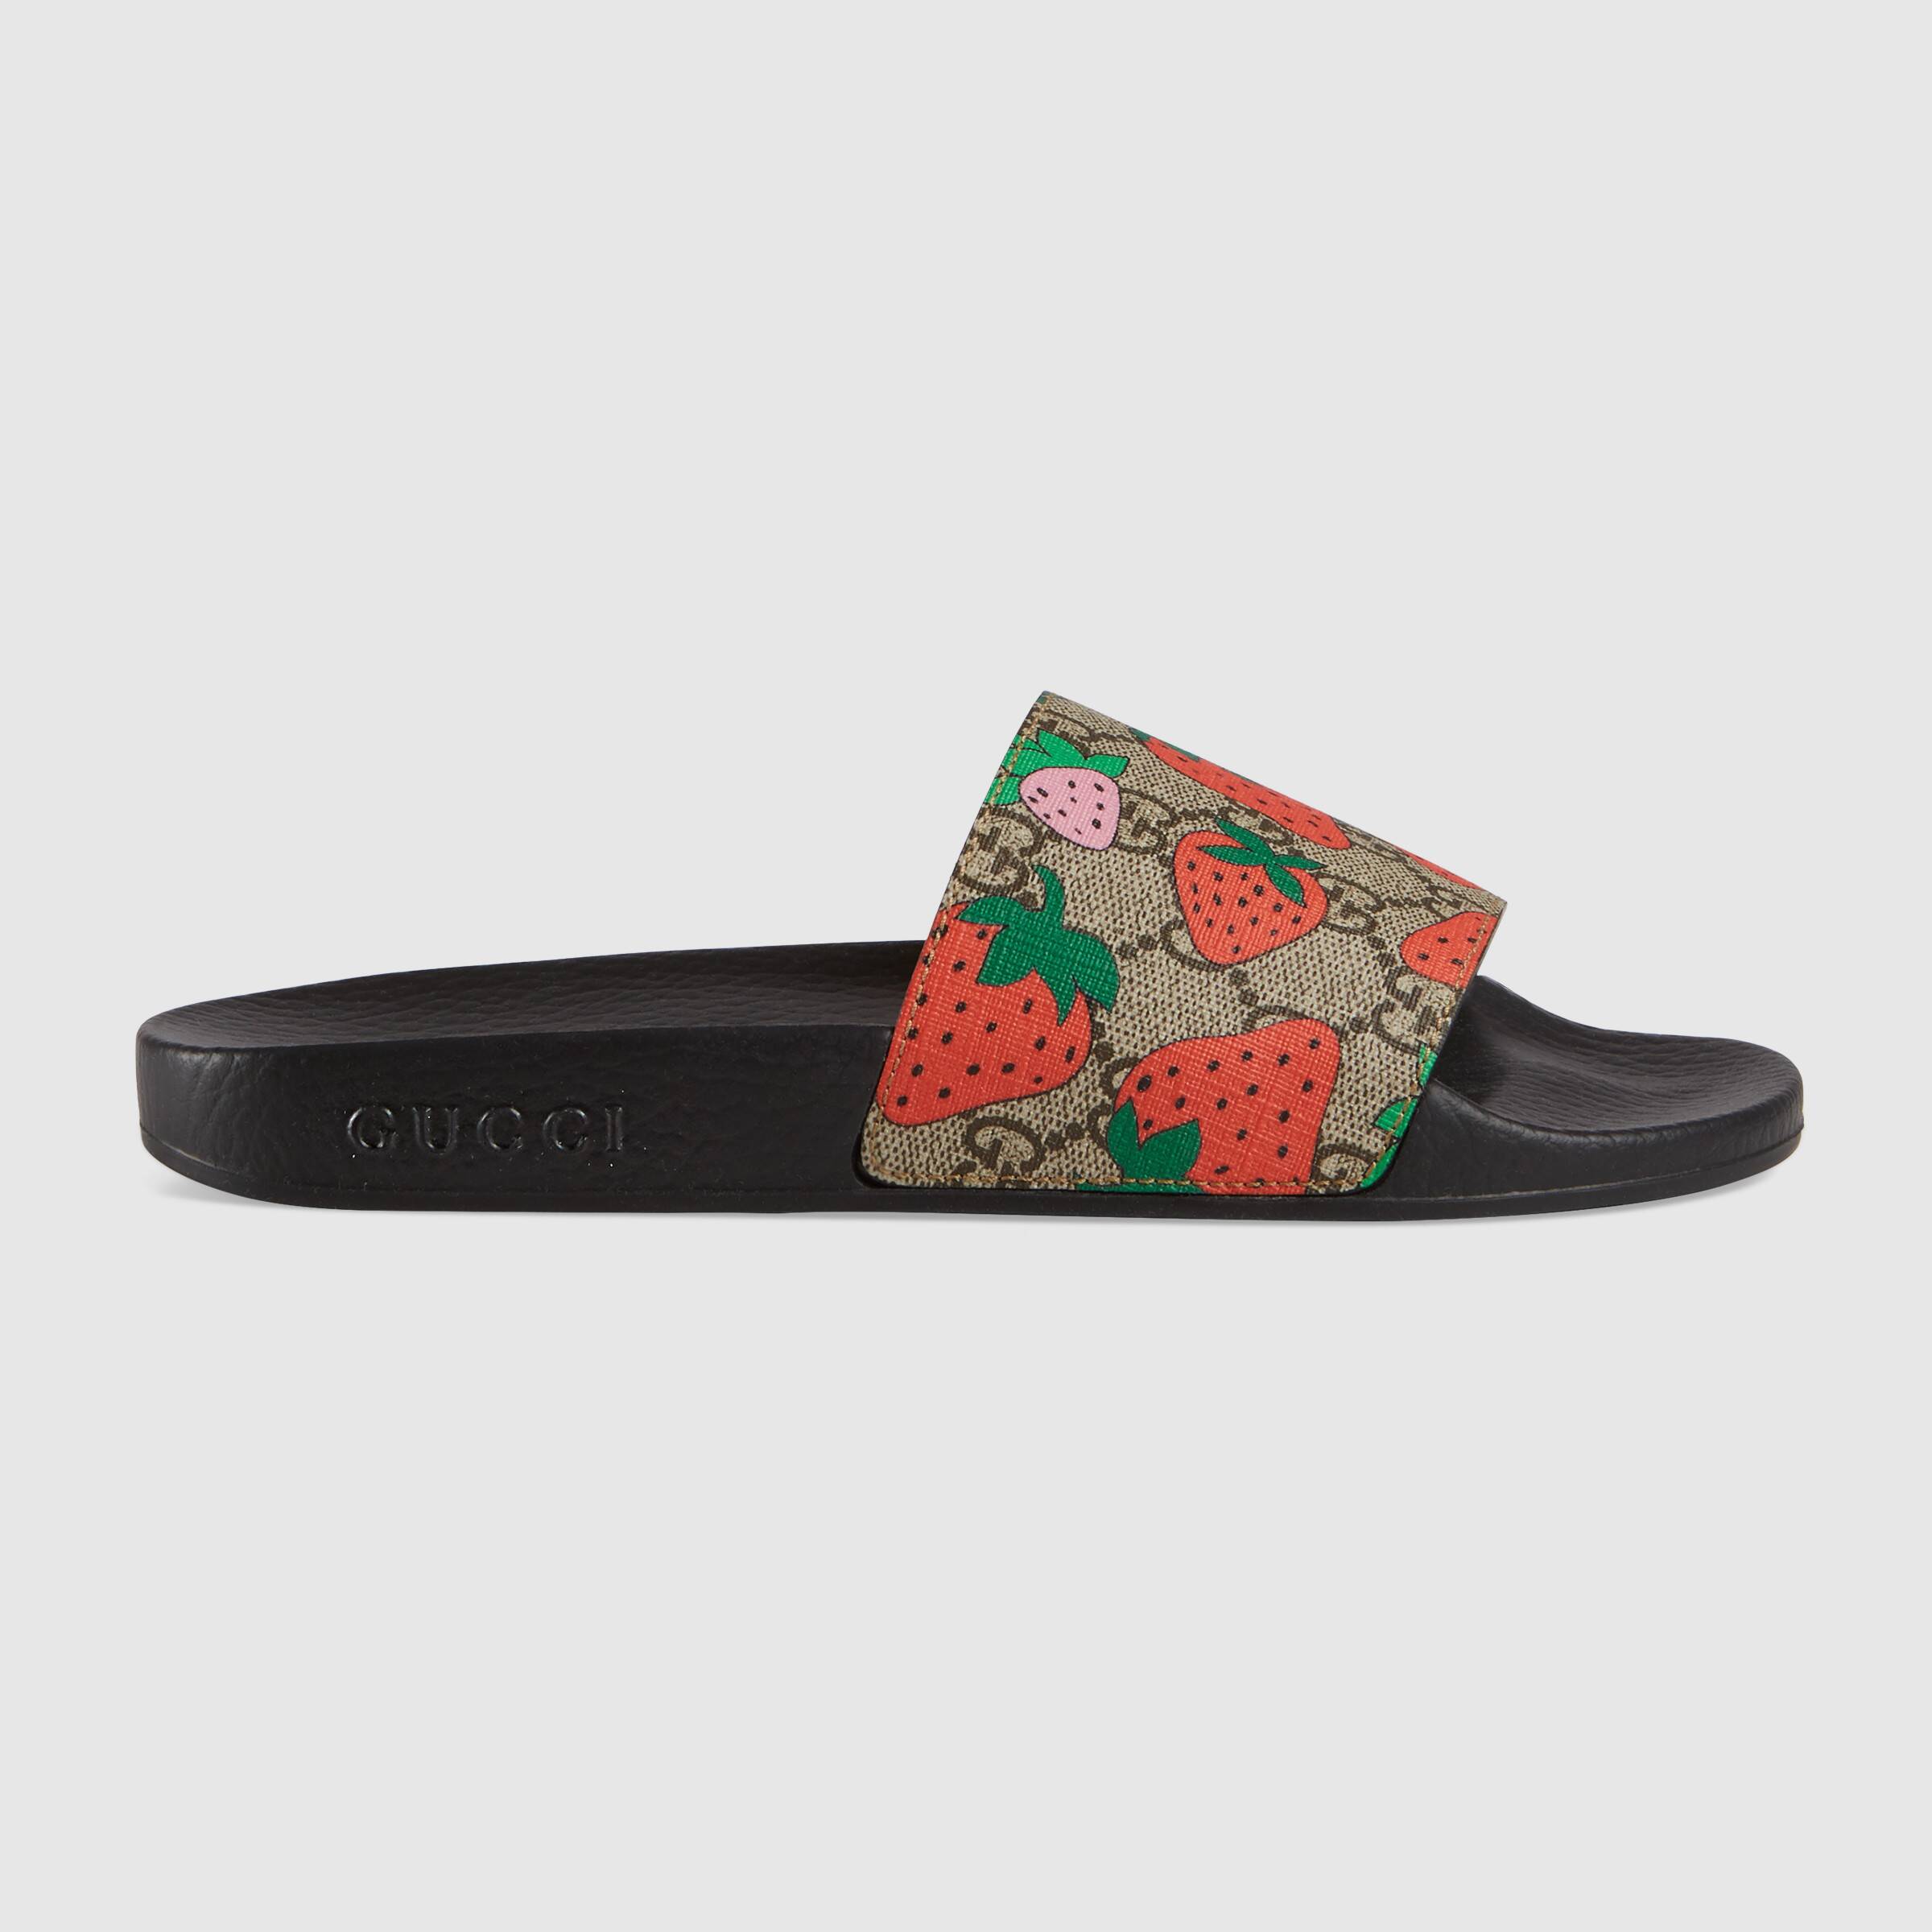 gucci strawberry shoes